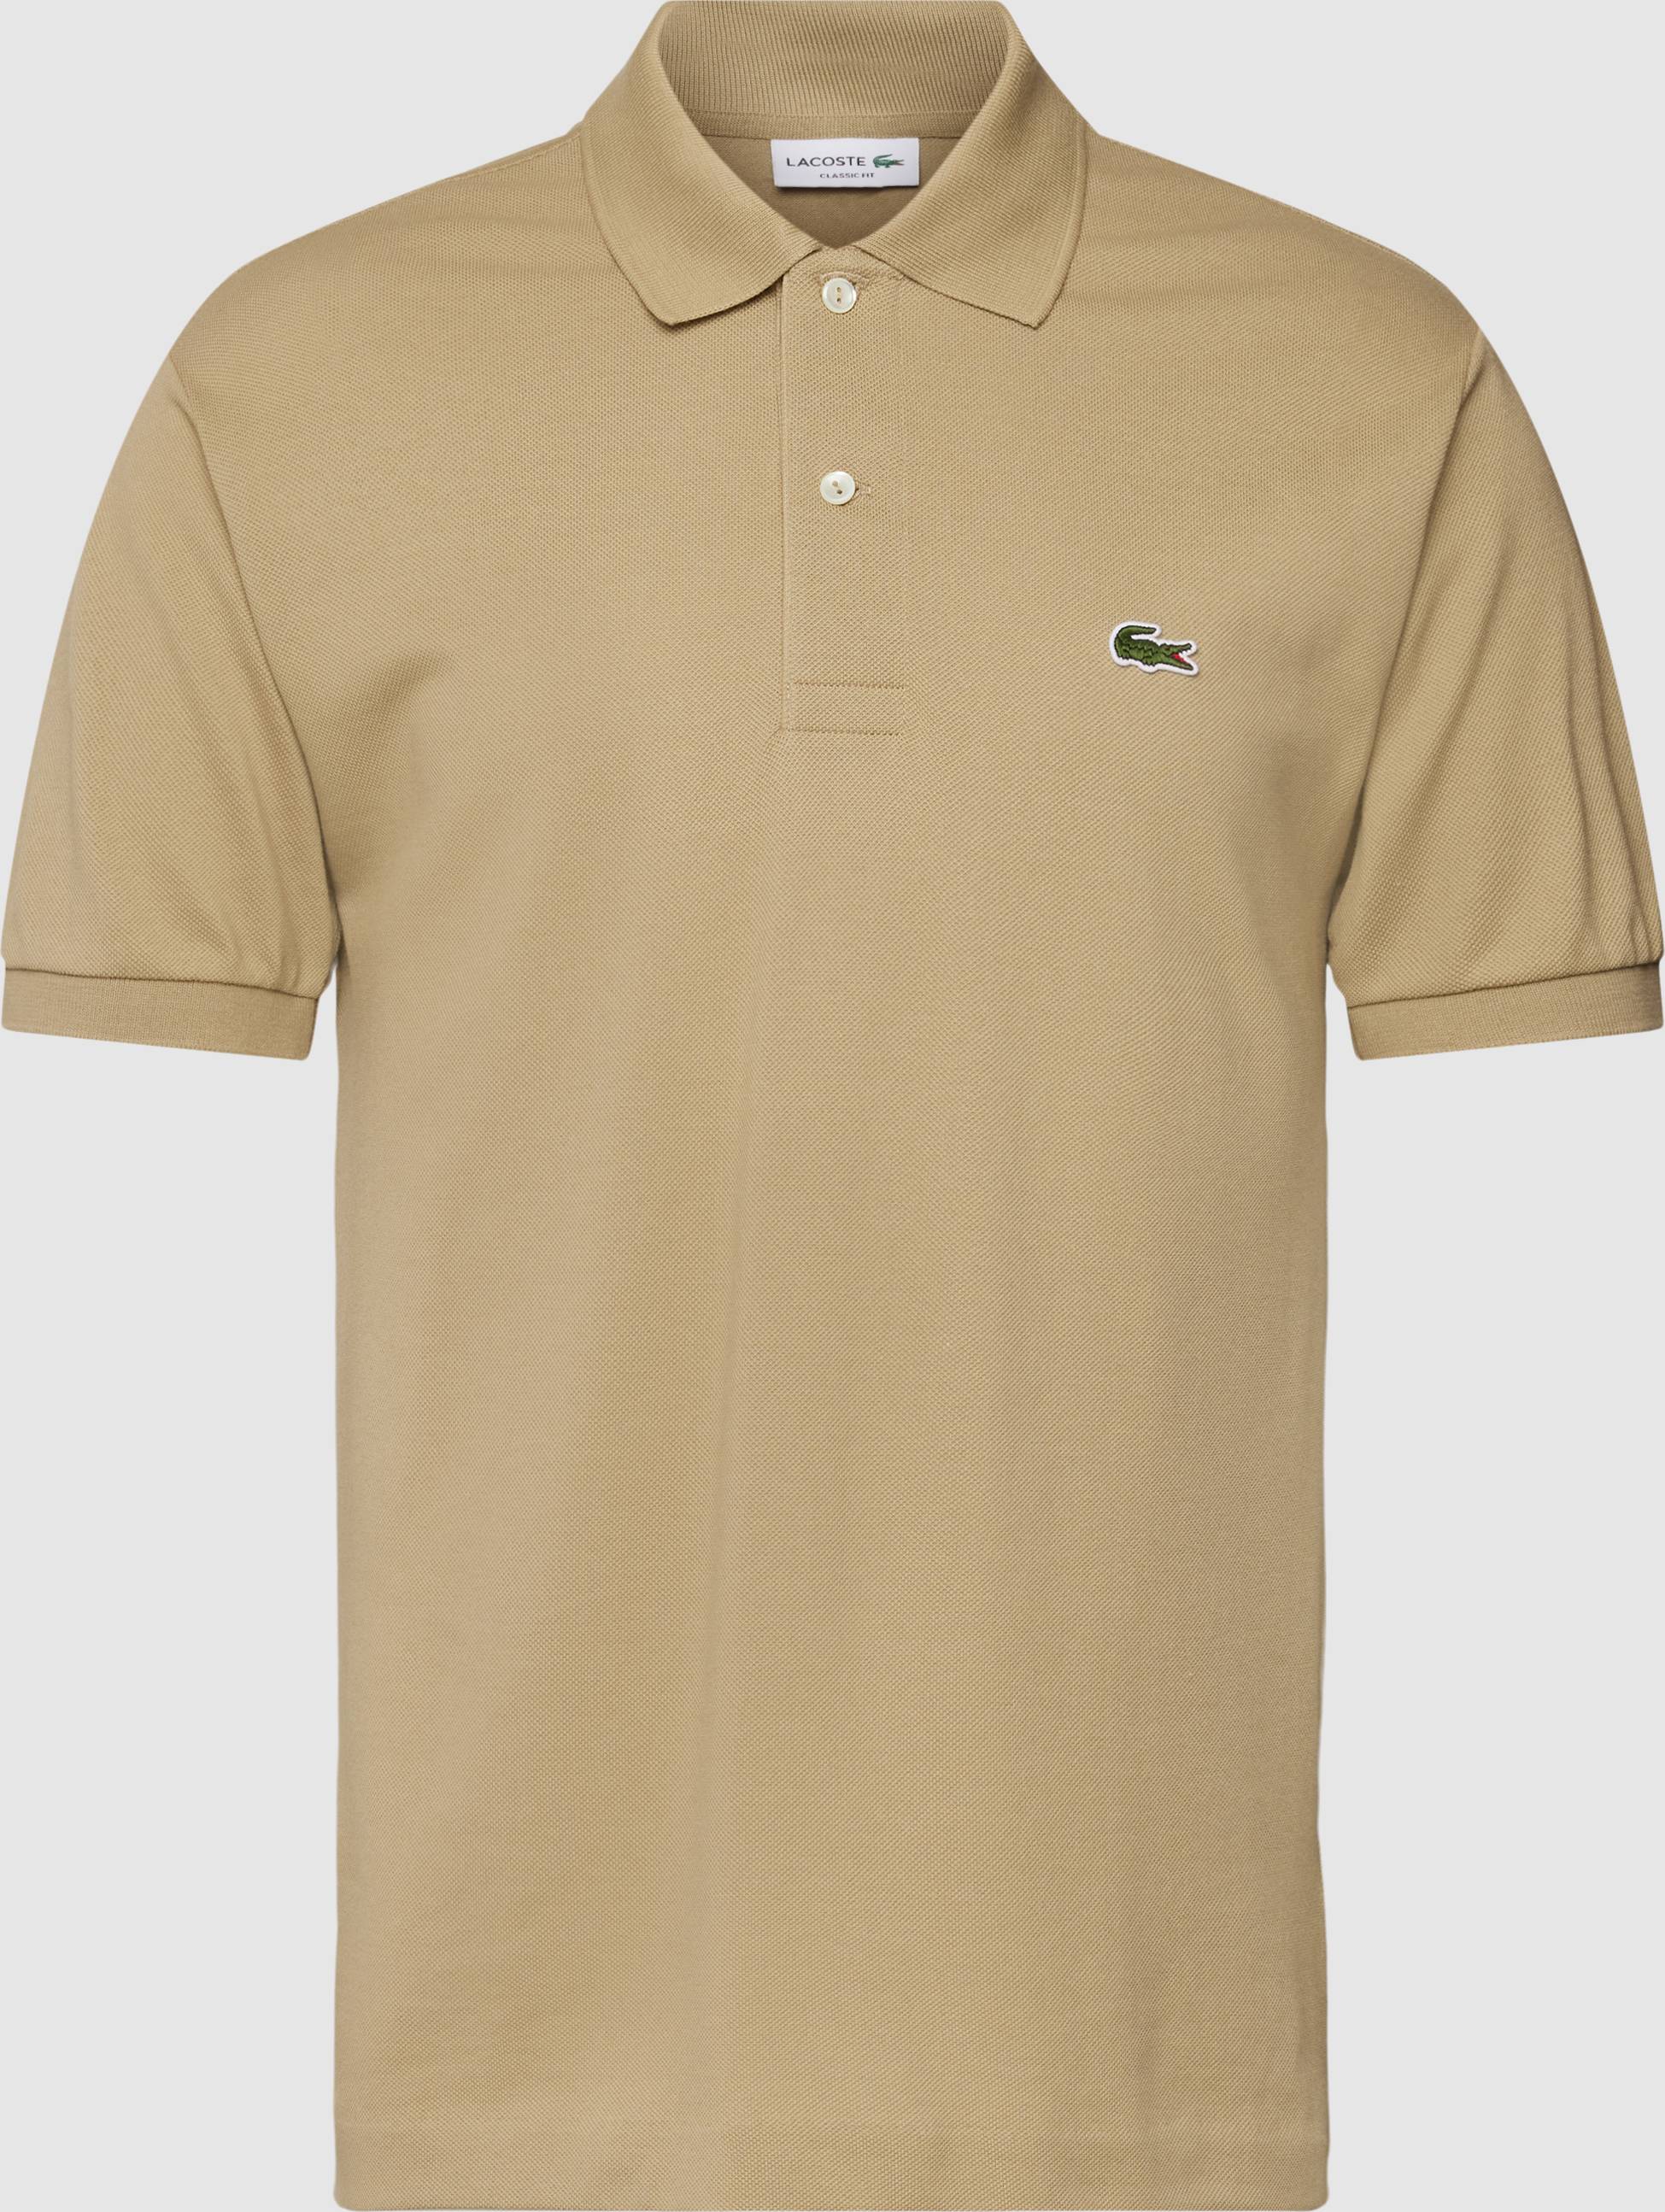 Lacoste Original Golf Polo Shirt • See best price